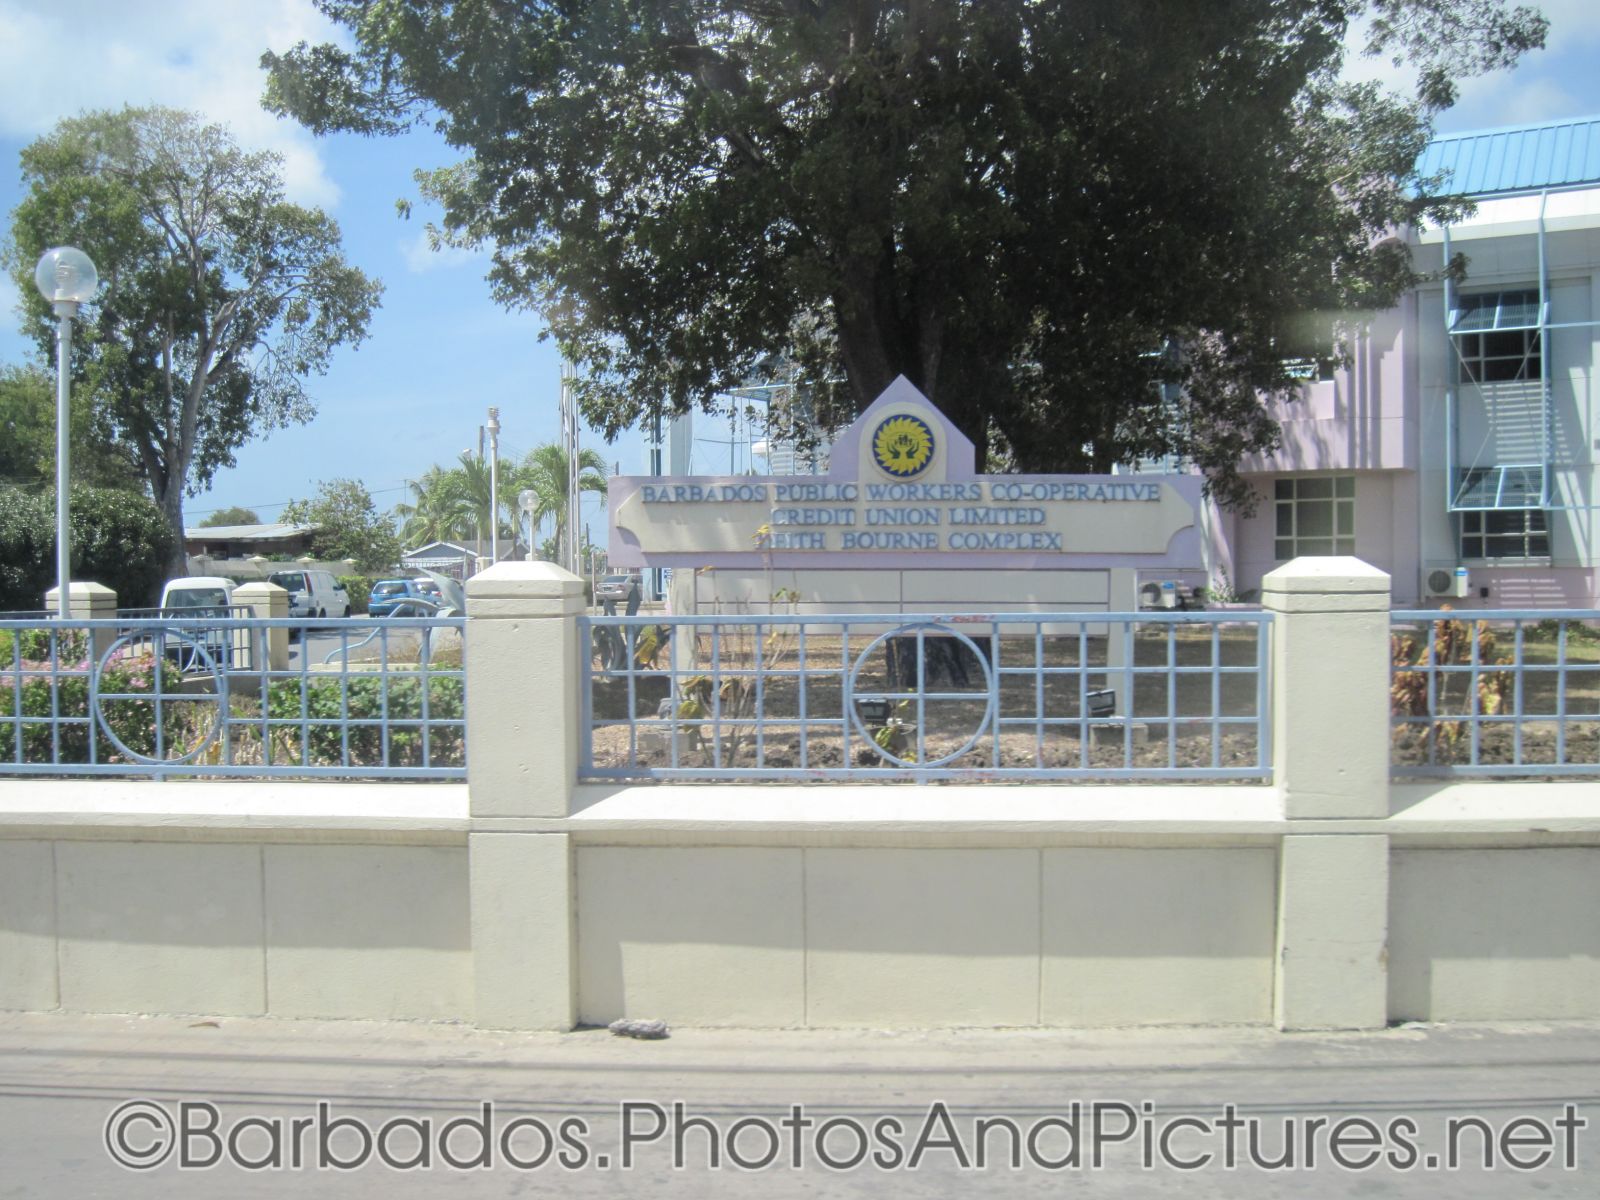 Barbados Public Workers co-Operative Credit Union Limited Keith Bourne Complex in Barbados.jpg
